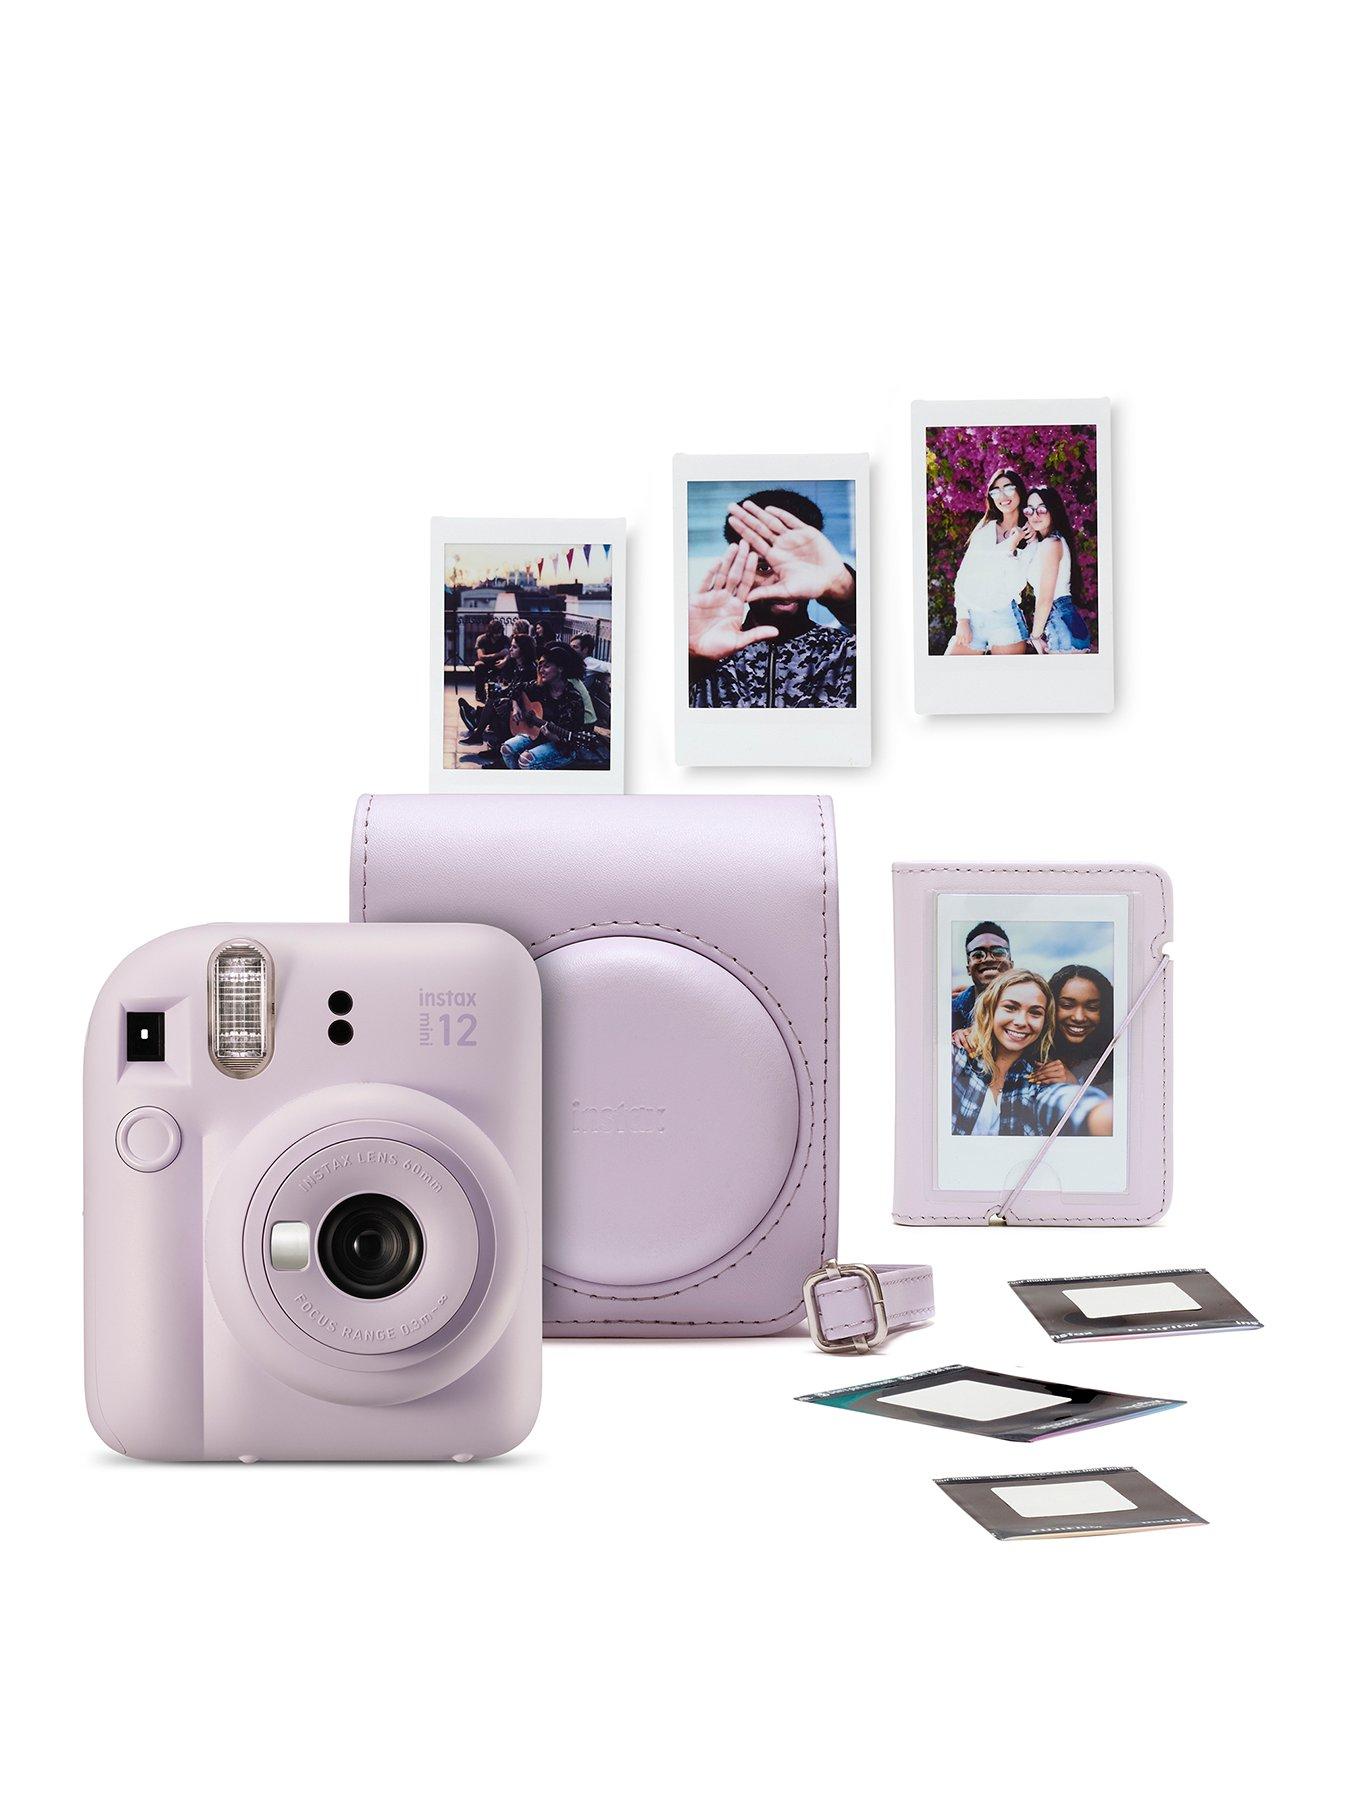  Fujifilm Instax Mini 9 Instant Camera – 10 Pack Accessory  Camera Bundle – 20 Instax Film – Camera Case – Instax leather Album - 4 AA  Rechargeable Batteries & Charger - And Much More (1 Year Warranty) :  Electronics